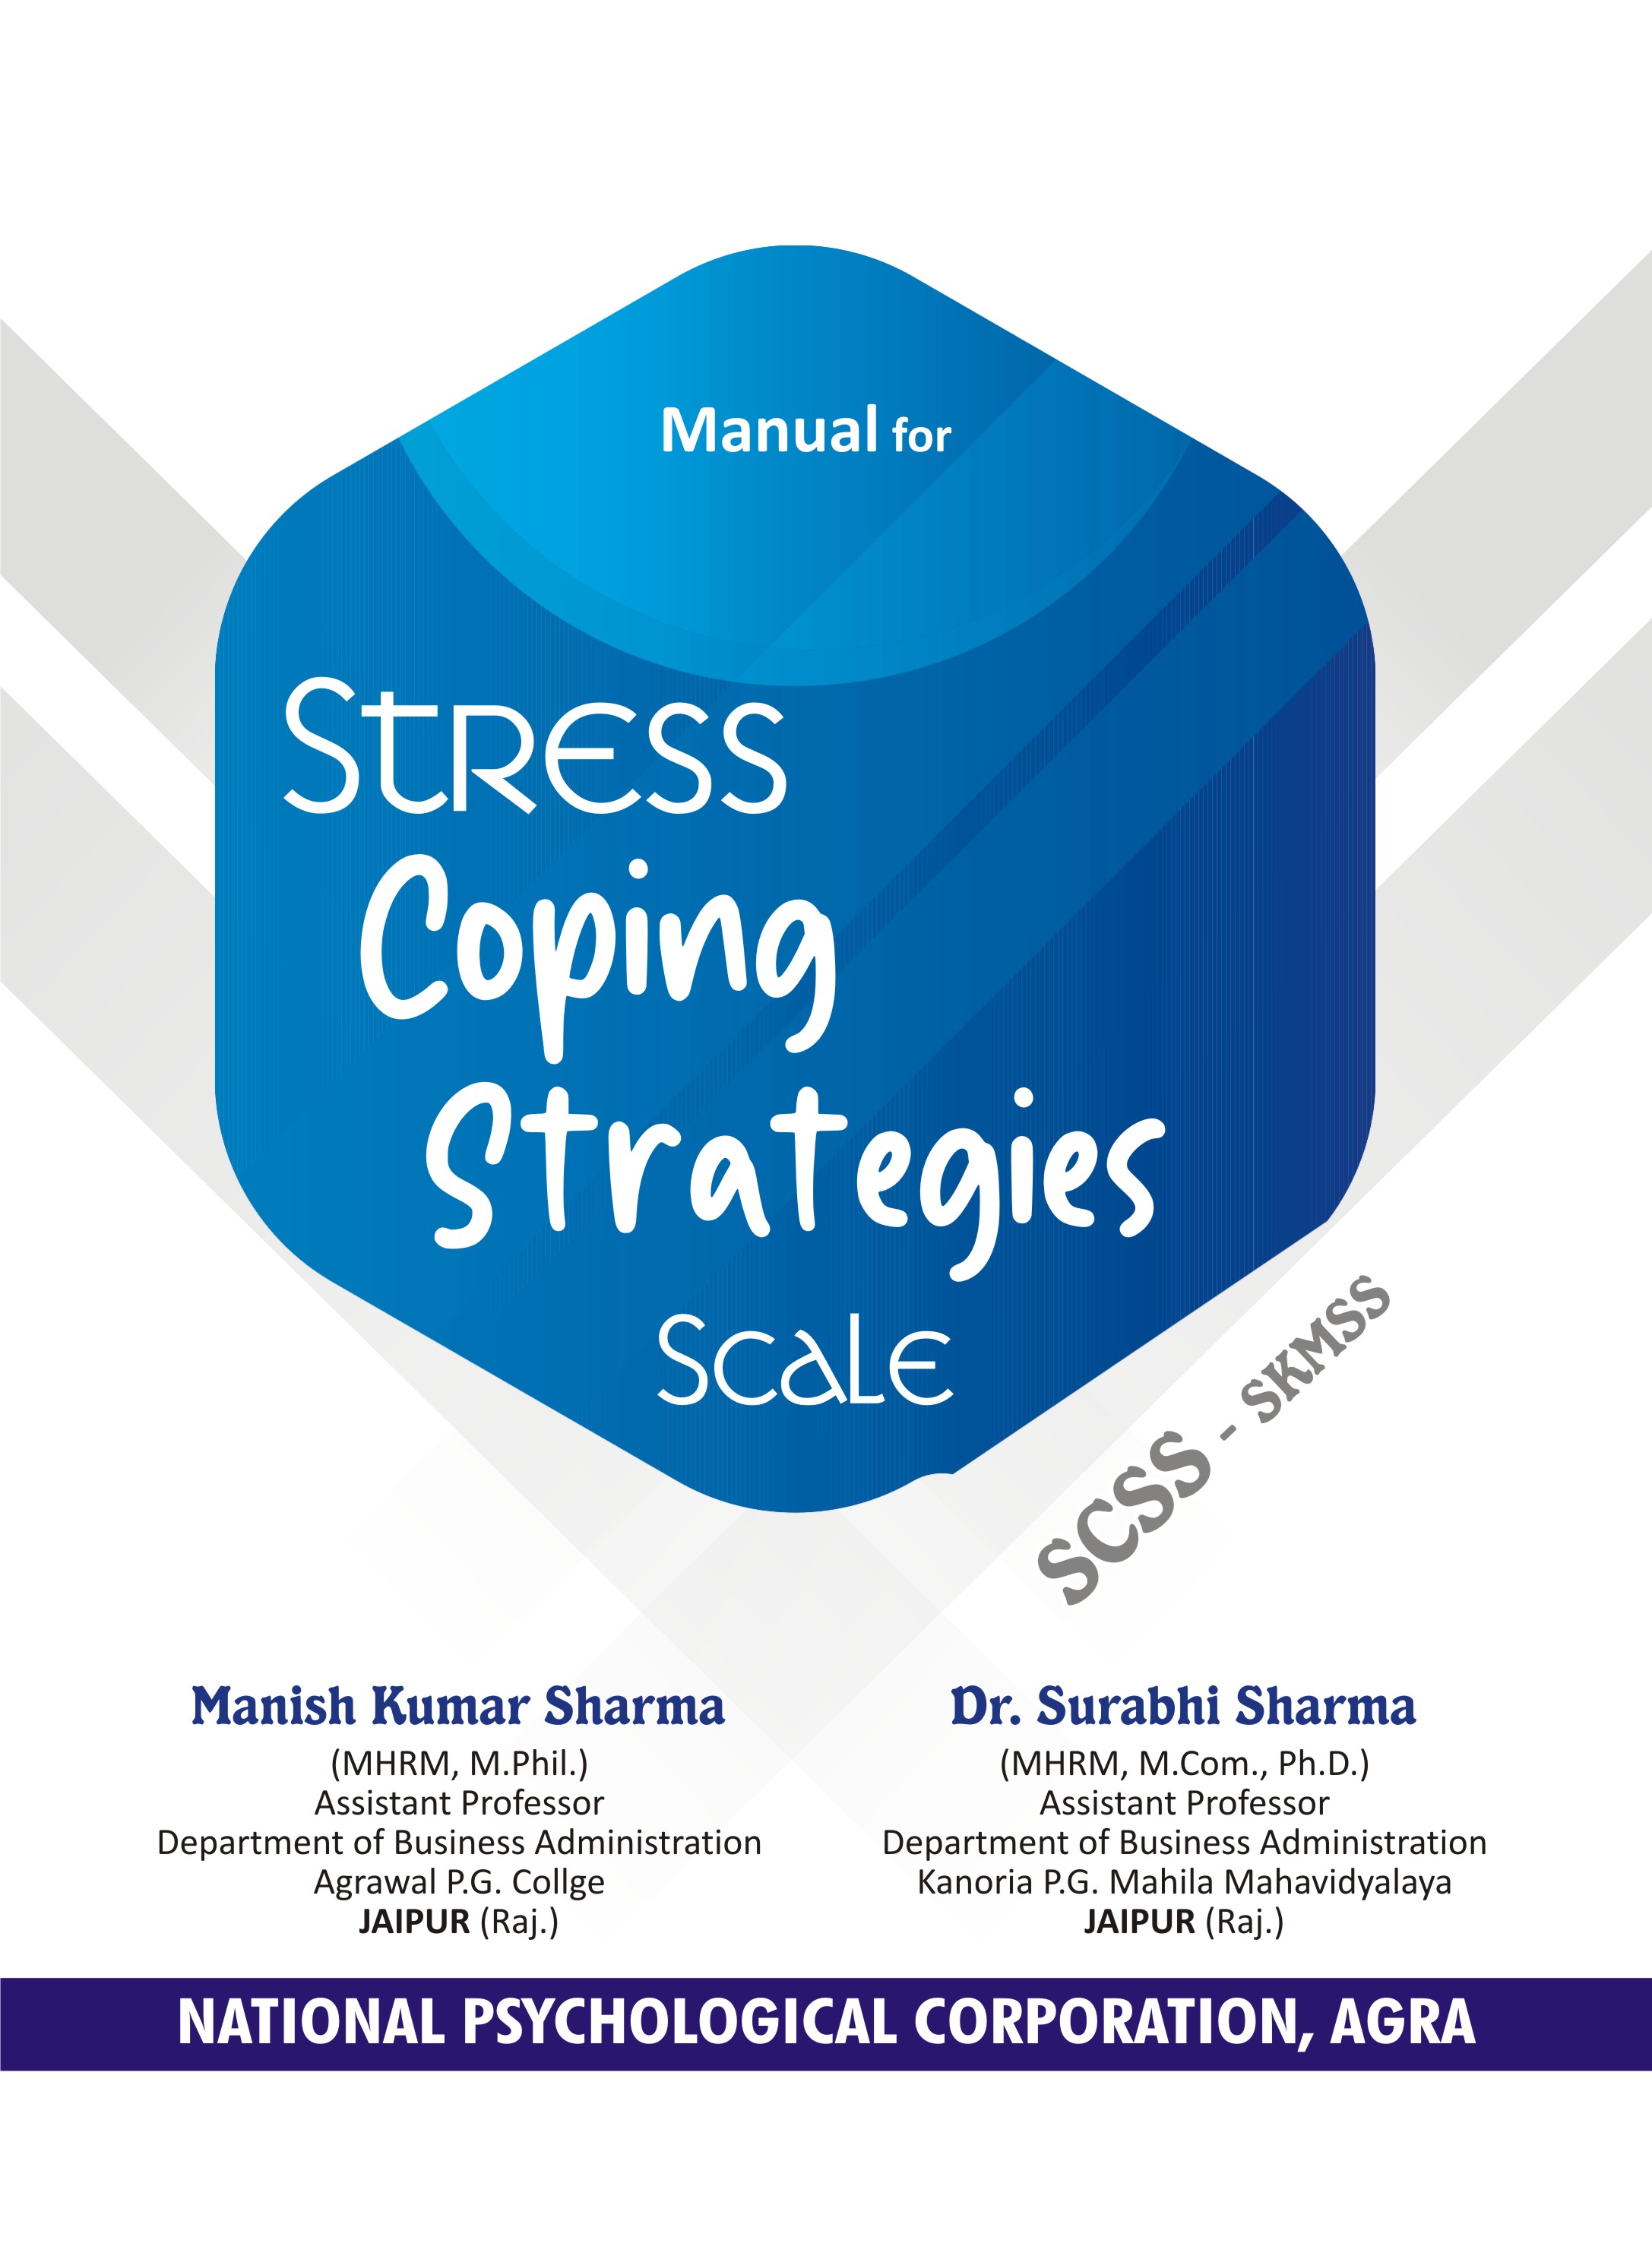 STRESS-COPING-STRATEGIES-SCALE